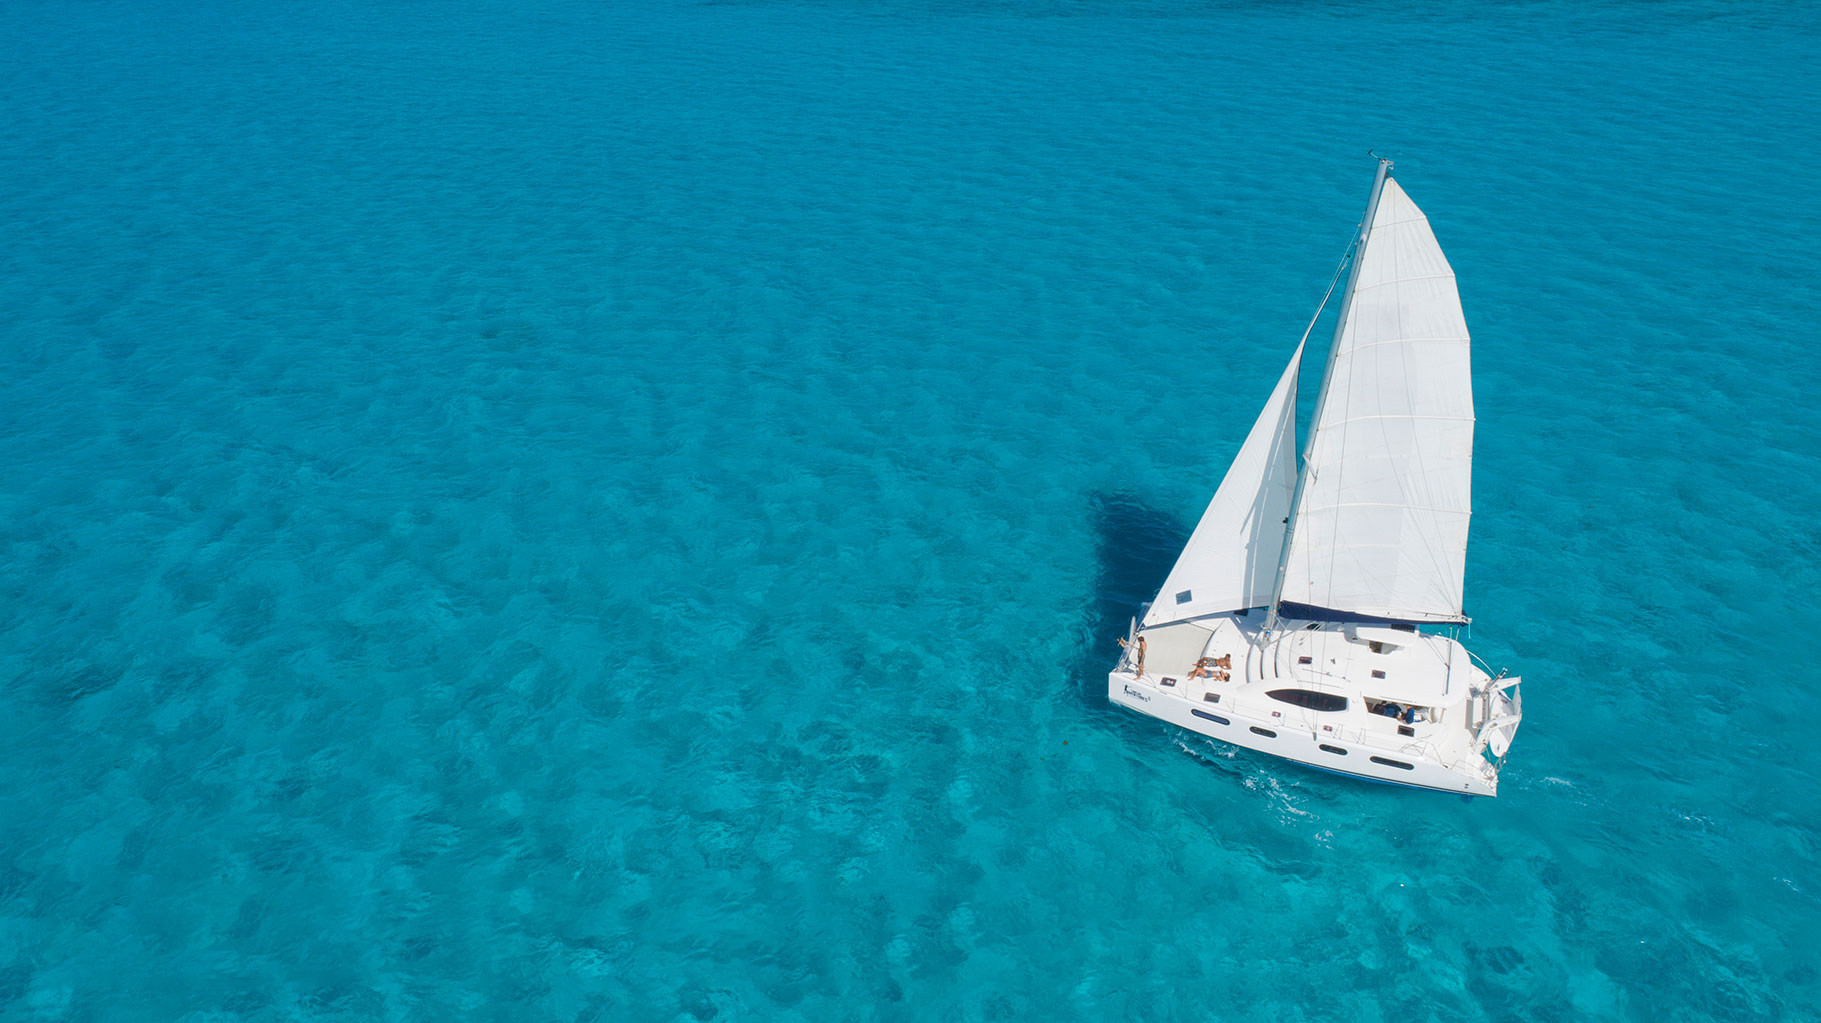 A white sailing boat on turquoise waters.